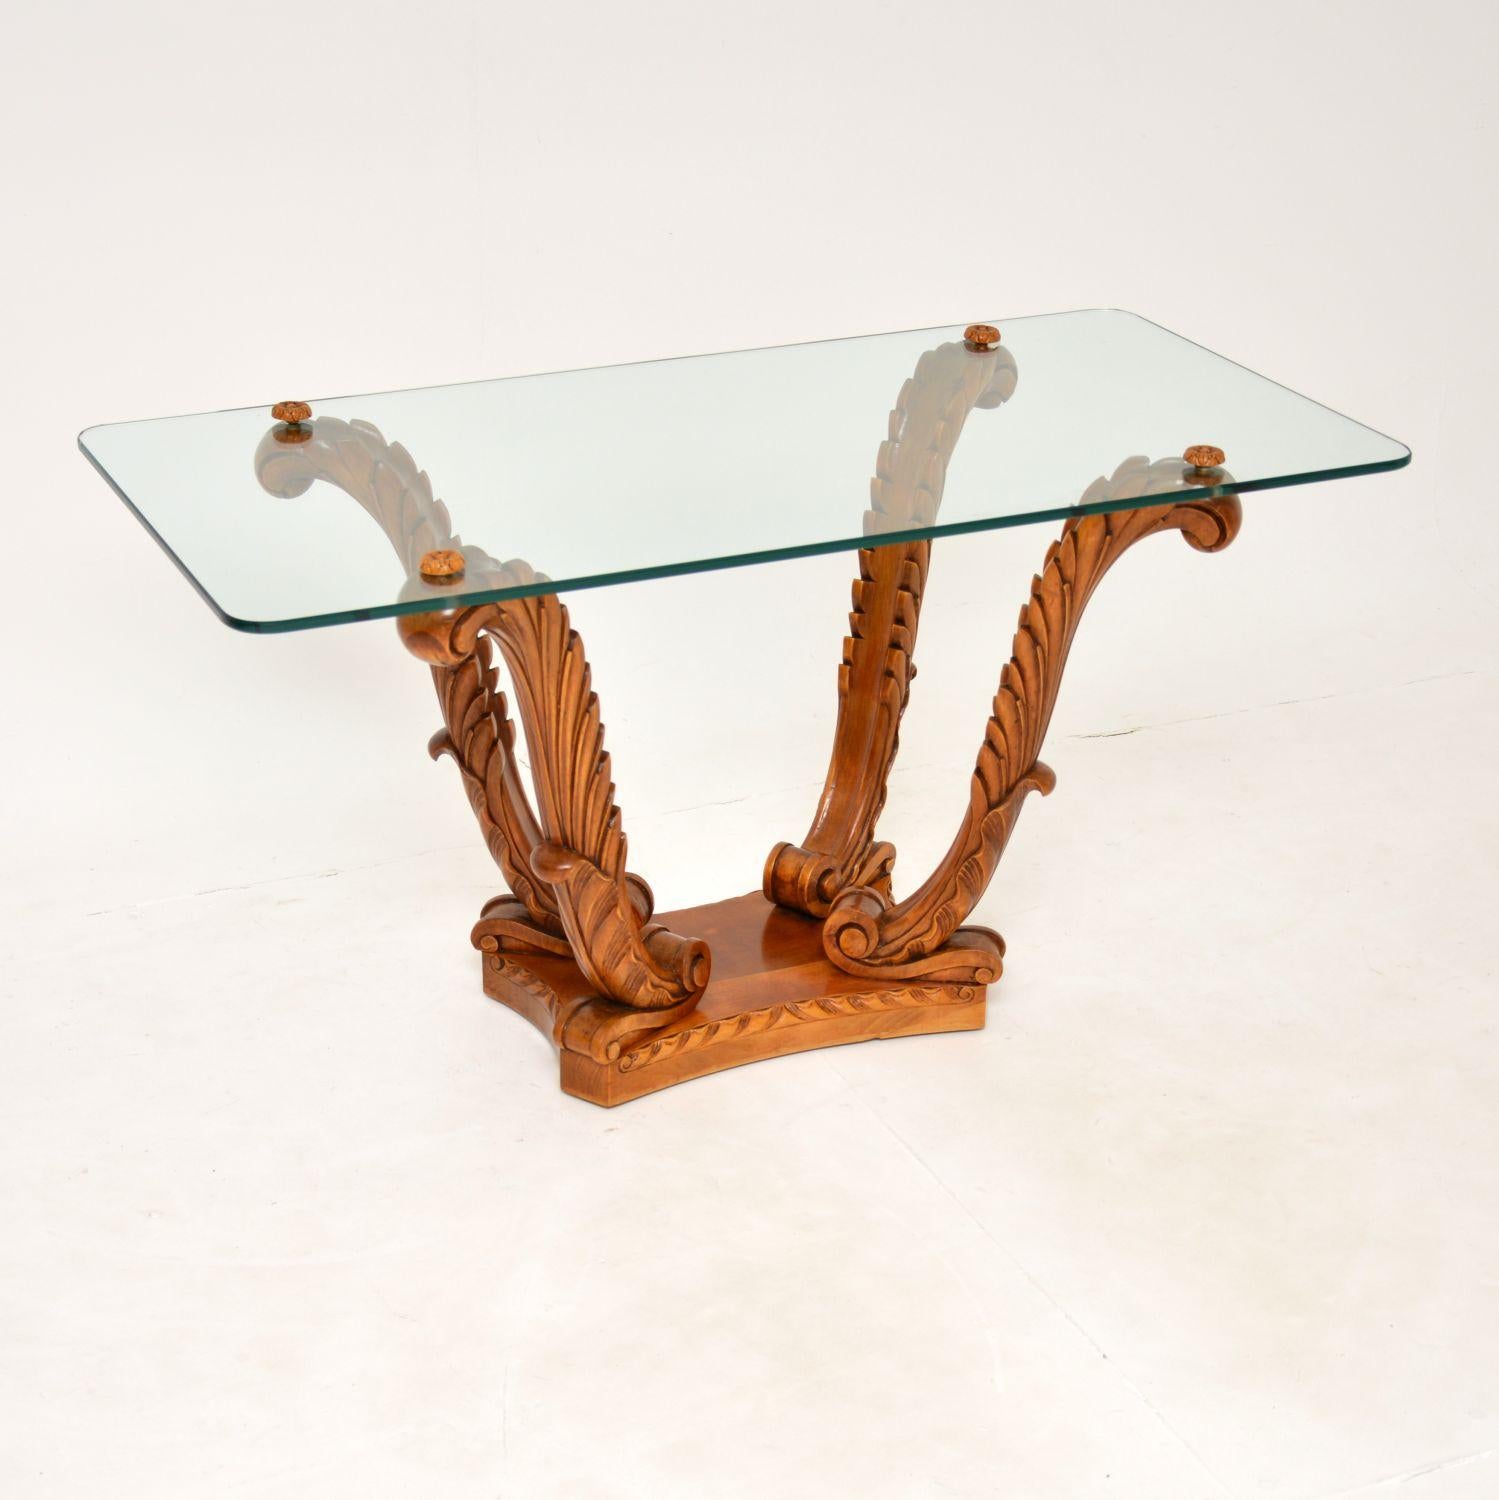 An absolutely stunning antique glass top coffee table, beautifully carved from solid satin wood. This was made in England by Hille, it dates from the 1920-1930’s.

The quality is exceptional, with profuse and crisp carving all over the base. The